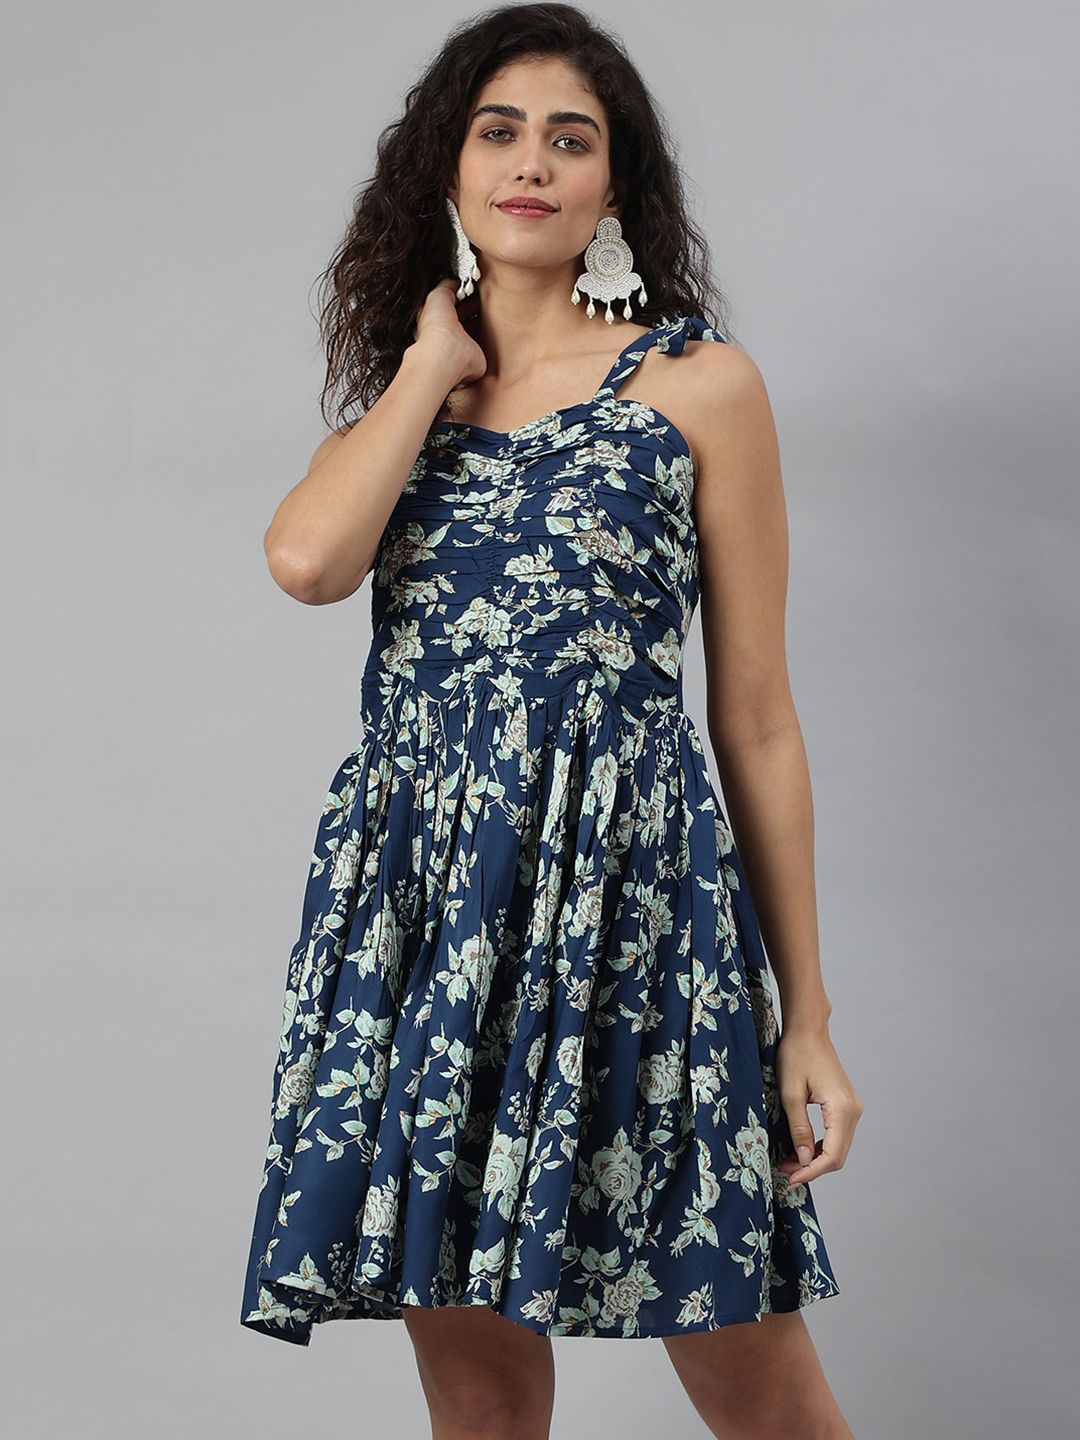 KALINI Blue Floral Dress Price in India